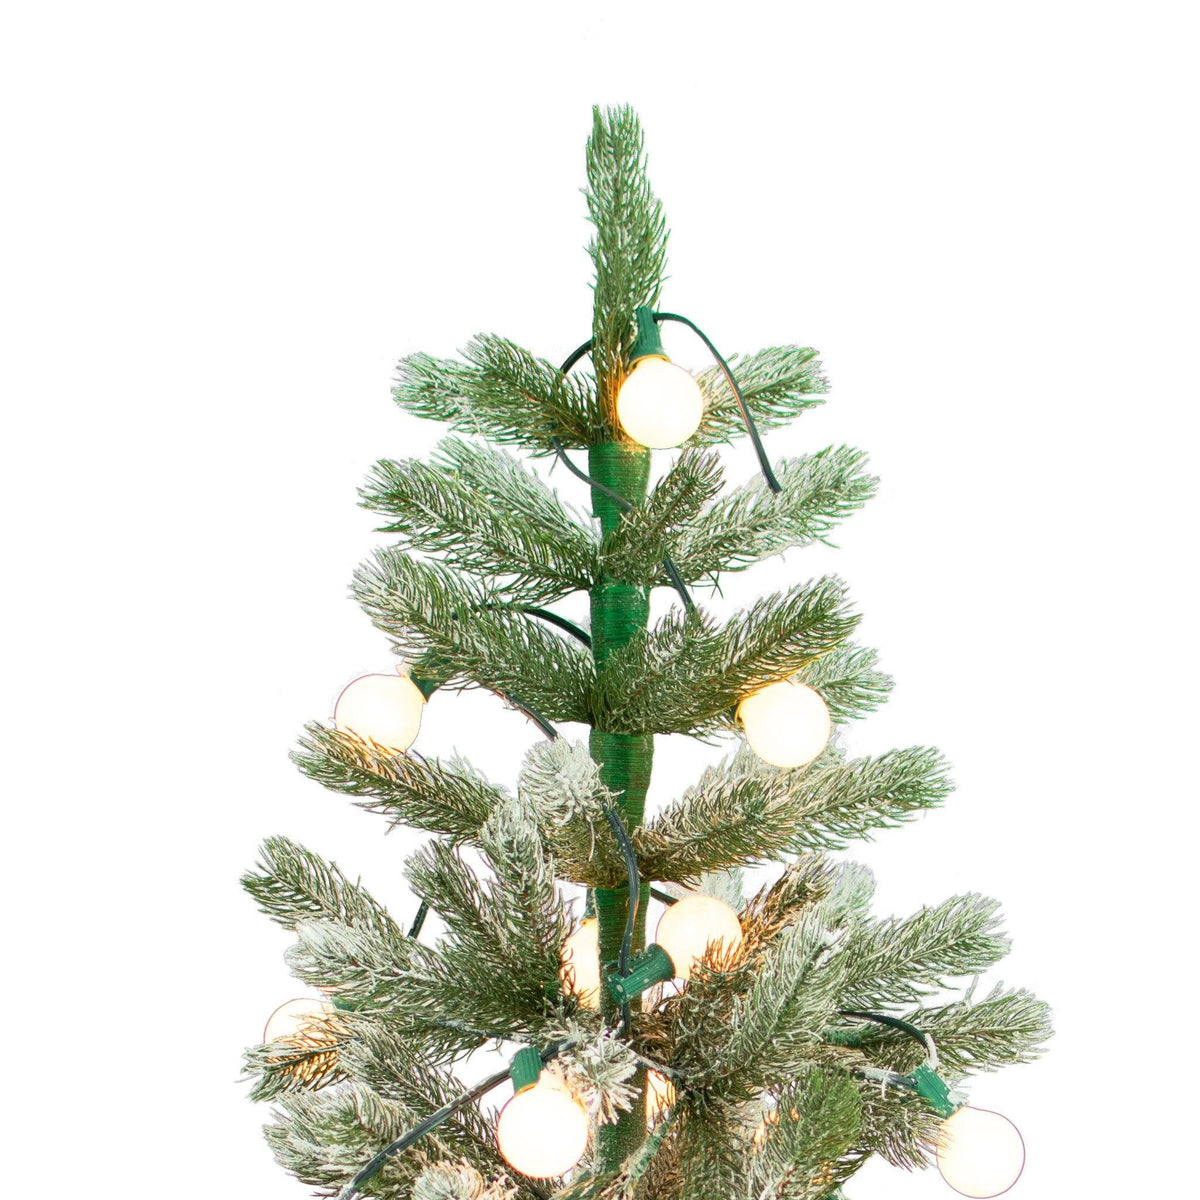 Lee Display's brand new Aspen Pine Christmas Trees are flocked with artificial white snow and lit with incandescent White G40 Lights.  Shop now at leedisplay.com